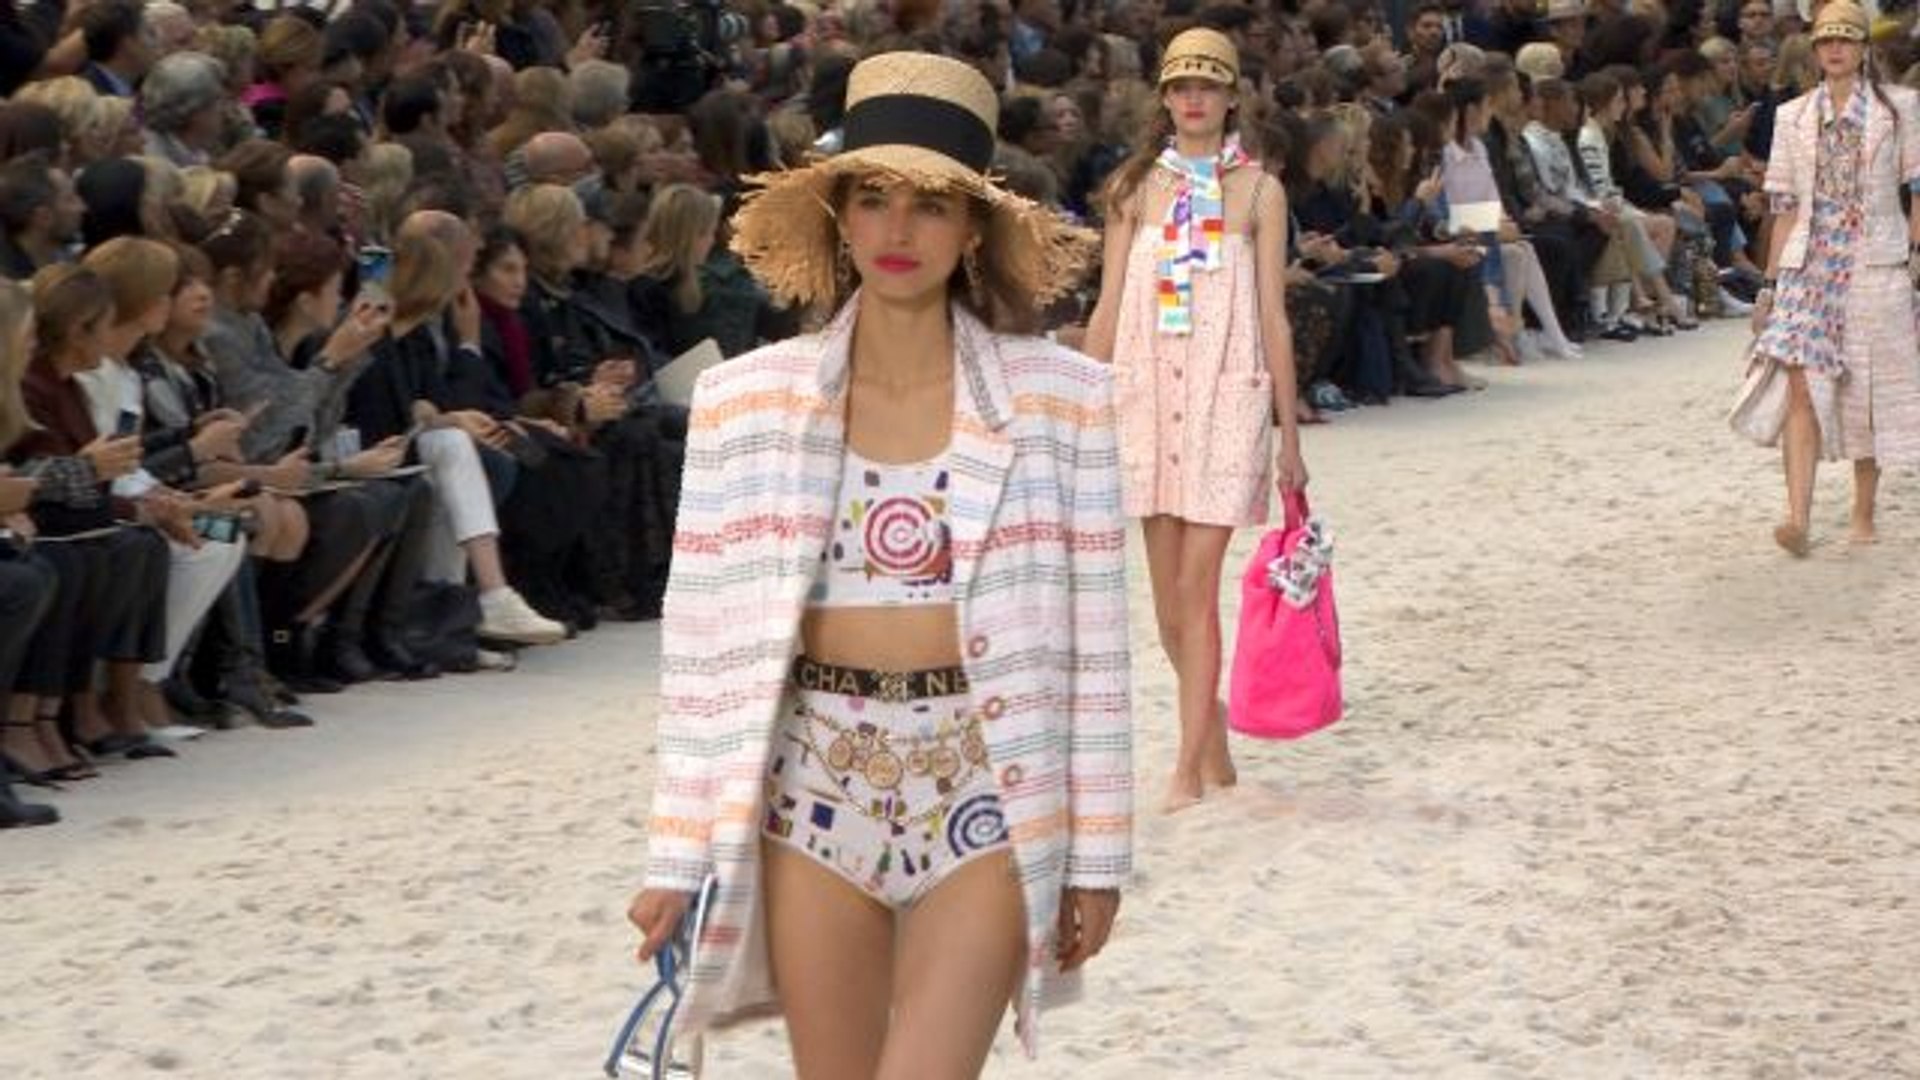 A New Way to Carry Your Bag, Courtesy of Chanel